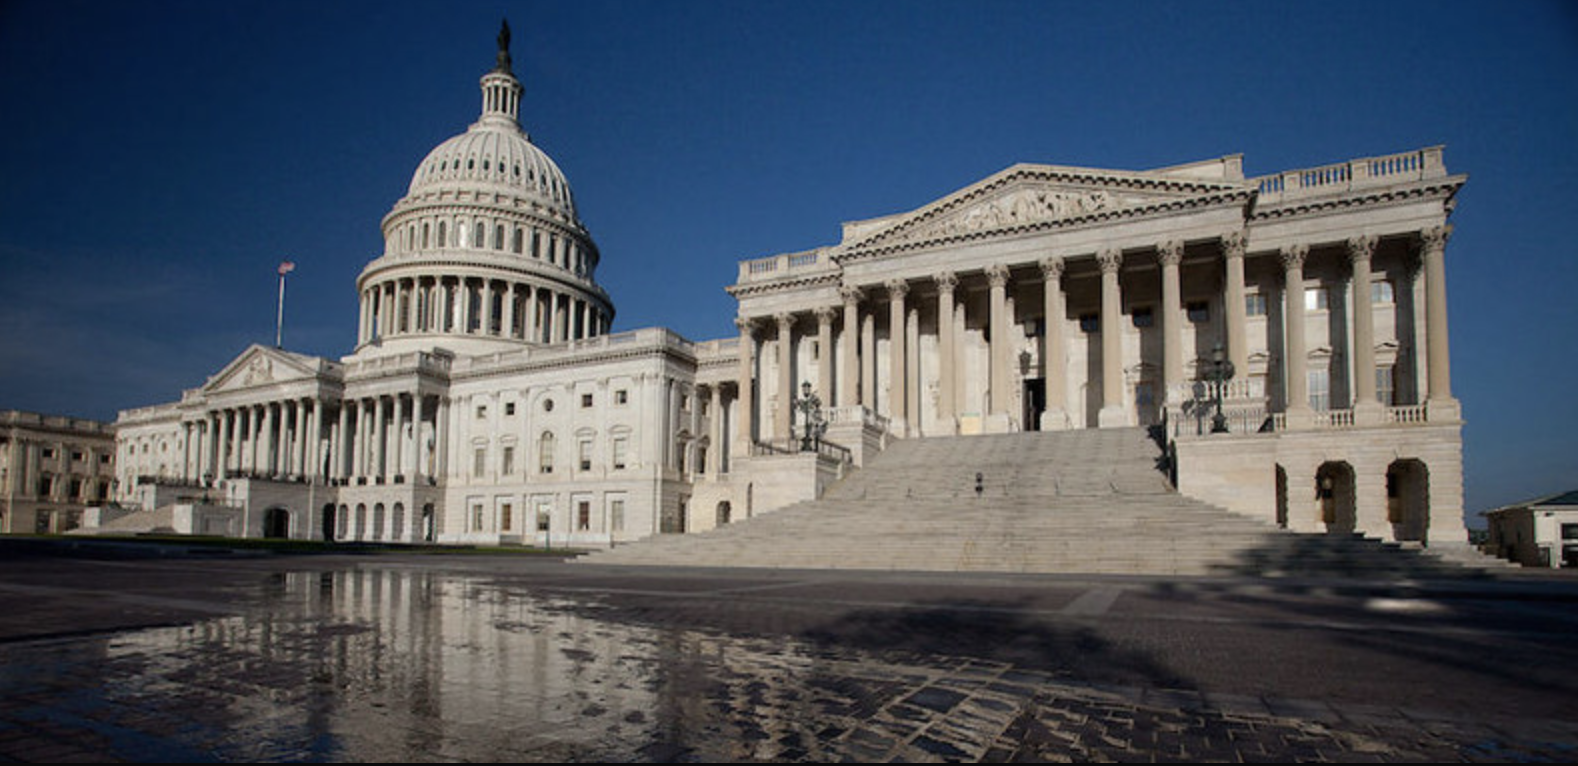 Photo shows the US Capitol building